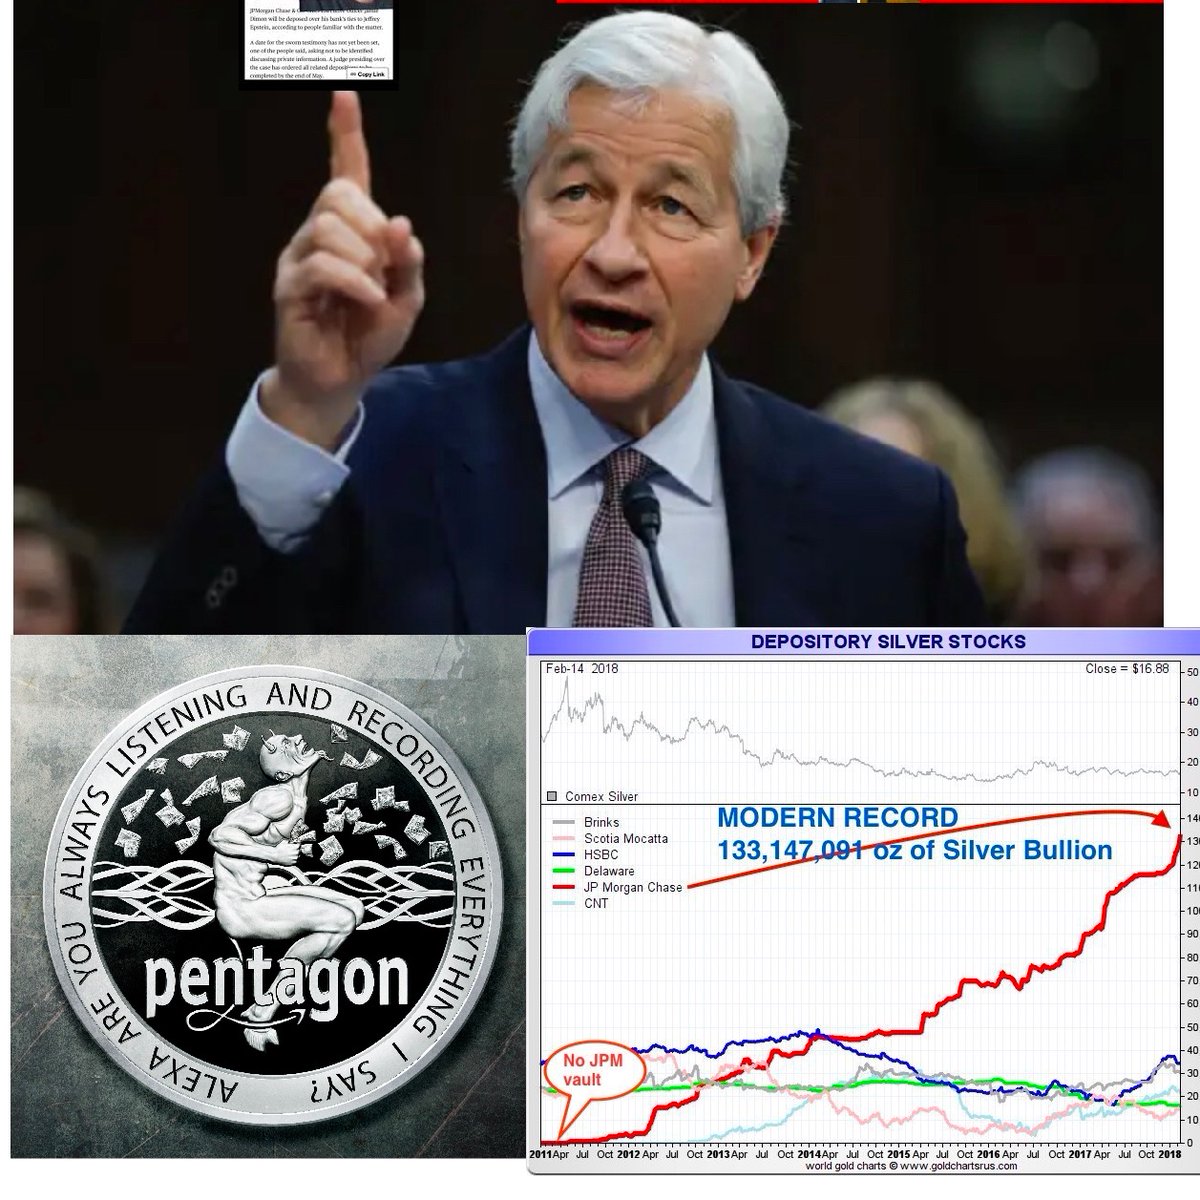 SILVER HAIR SILVER SHIELD
A lot of boomers don’t like what is coming and now see SILVER SHIELD at the tip of EXTER’S Pyramid of liquidity into the Silver Age of Humanity based on Truth.
Jamie Dimon JPM BIGGEST SILVER STACKER ON EARTH
#SILVERSQUEEZE #SILVERSHIELD Derivative Loses